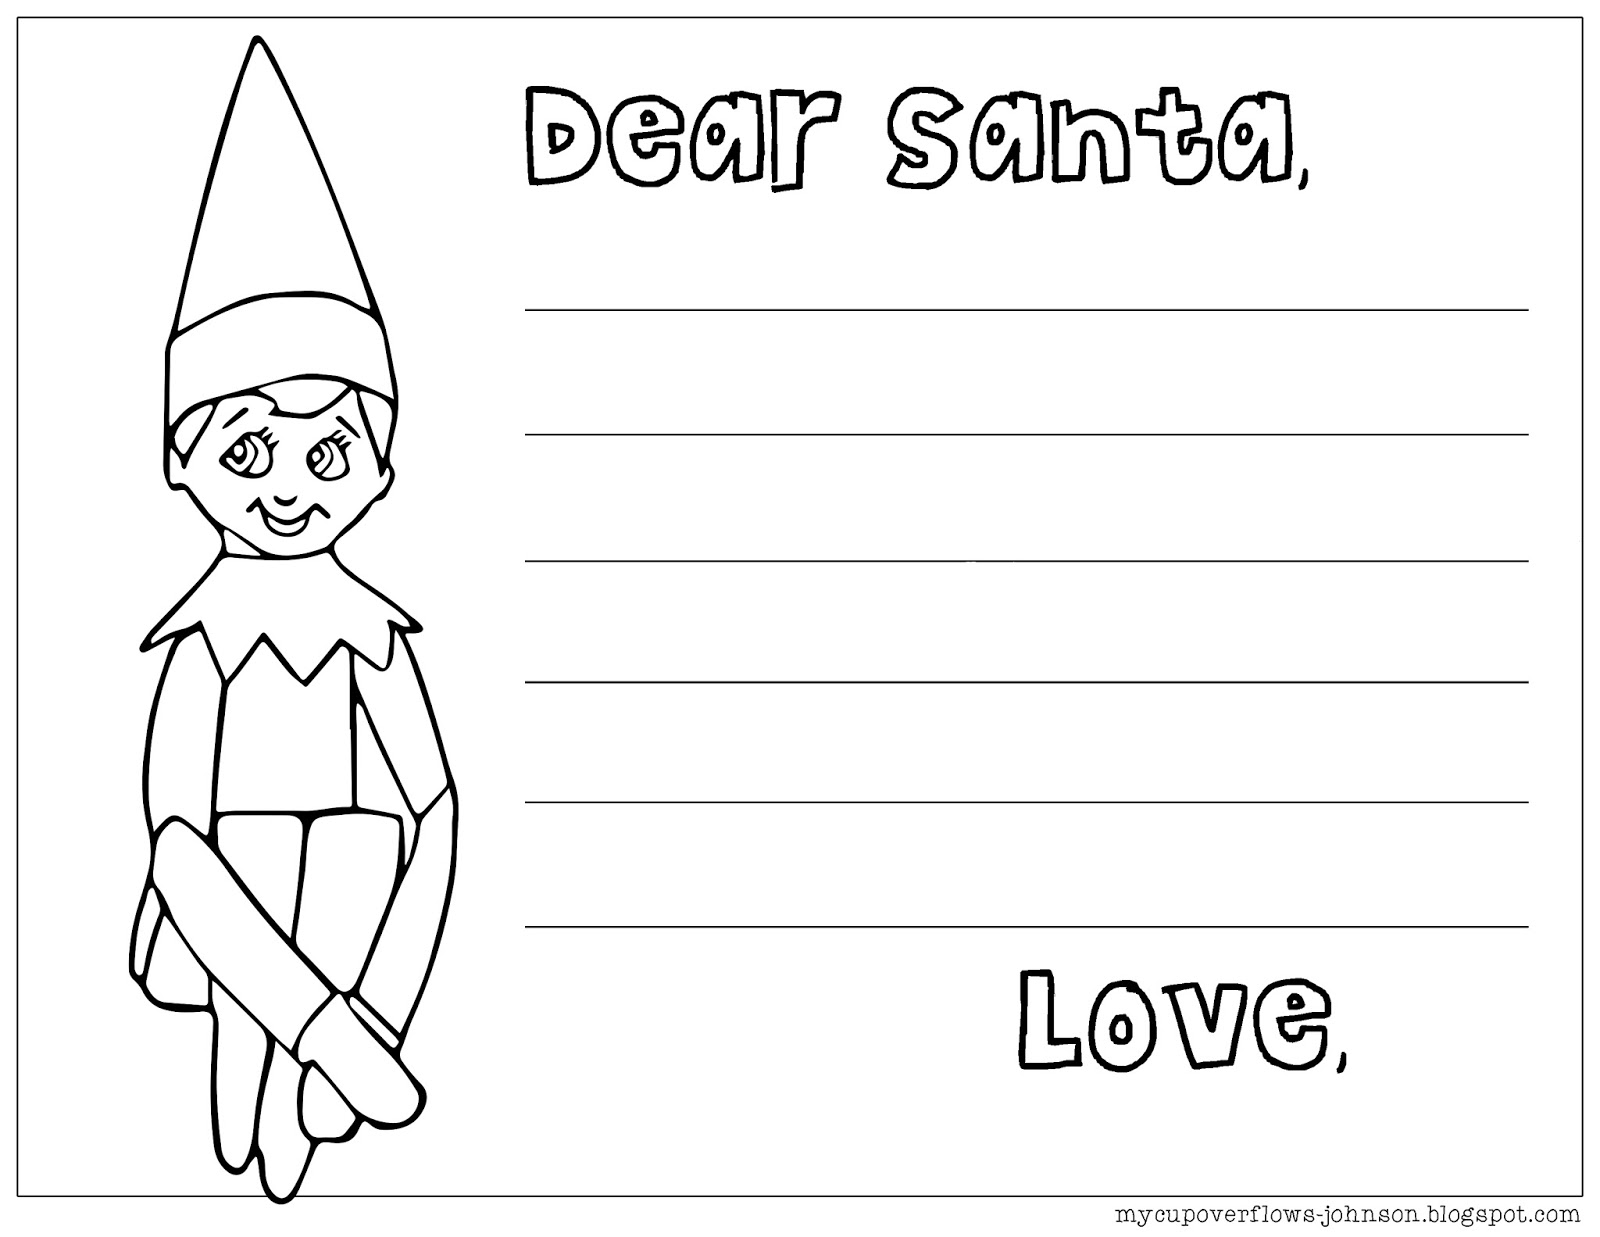 My Cup Overflows Elf on the Shelf Coloring Page